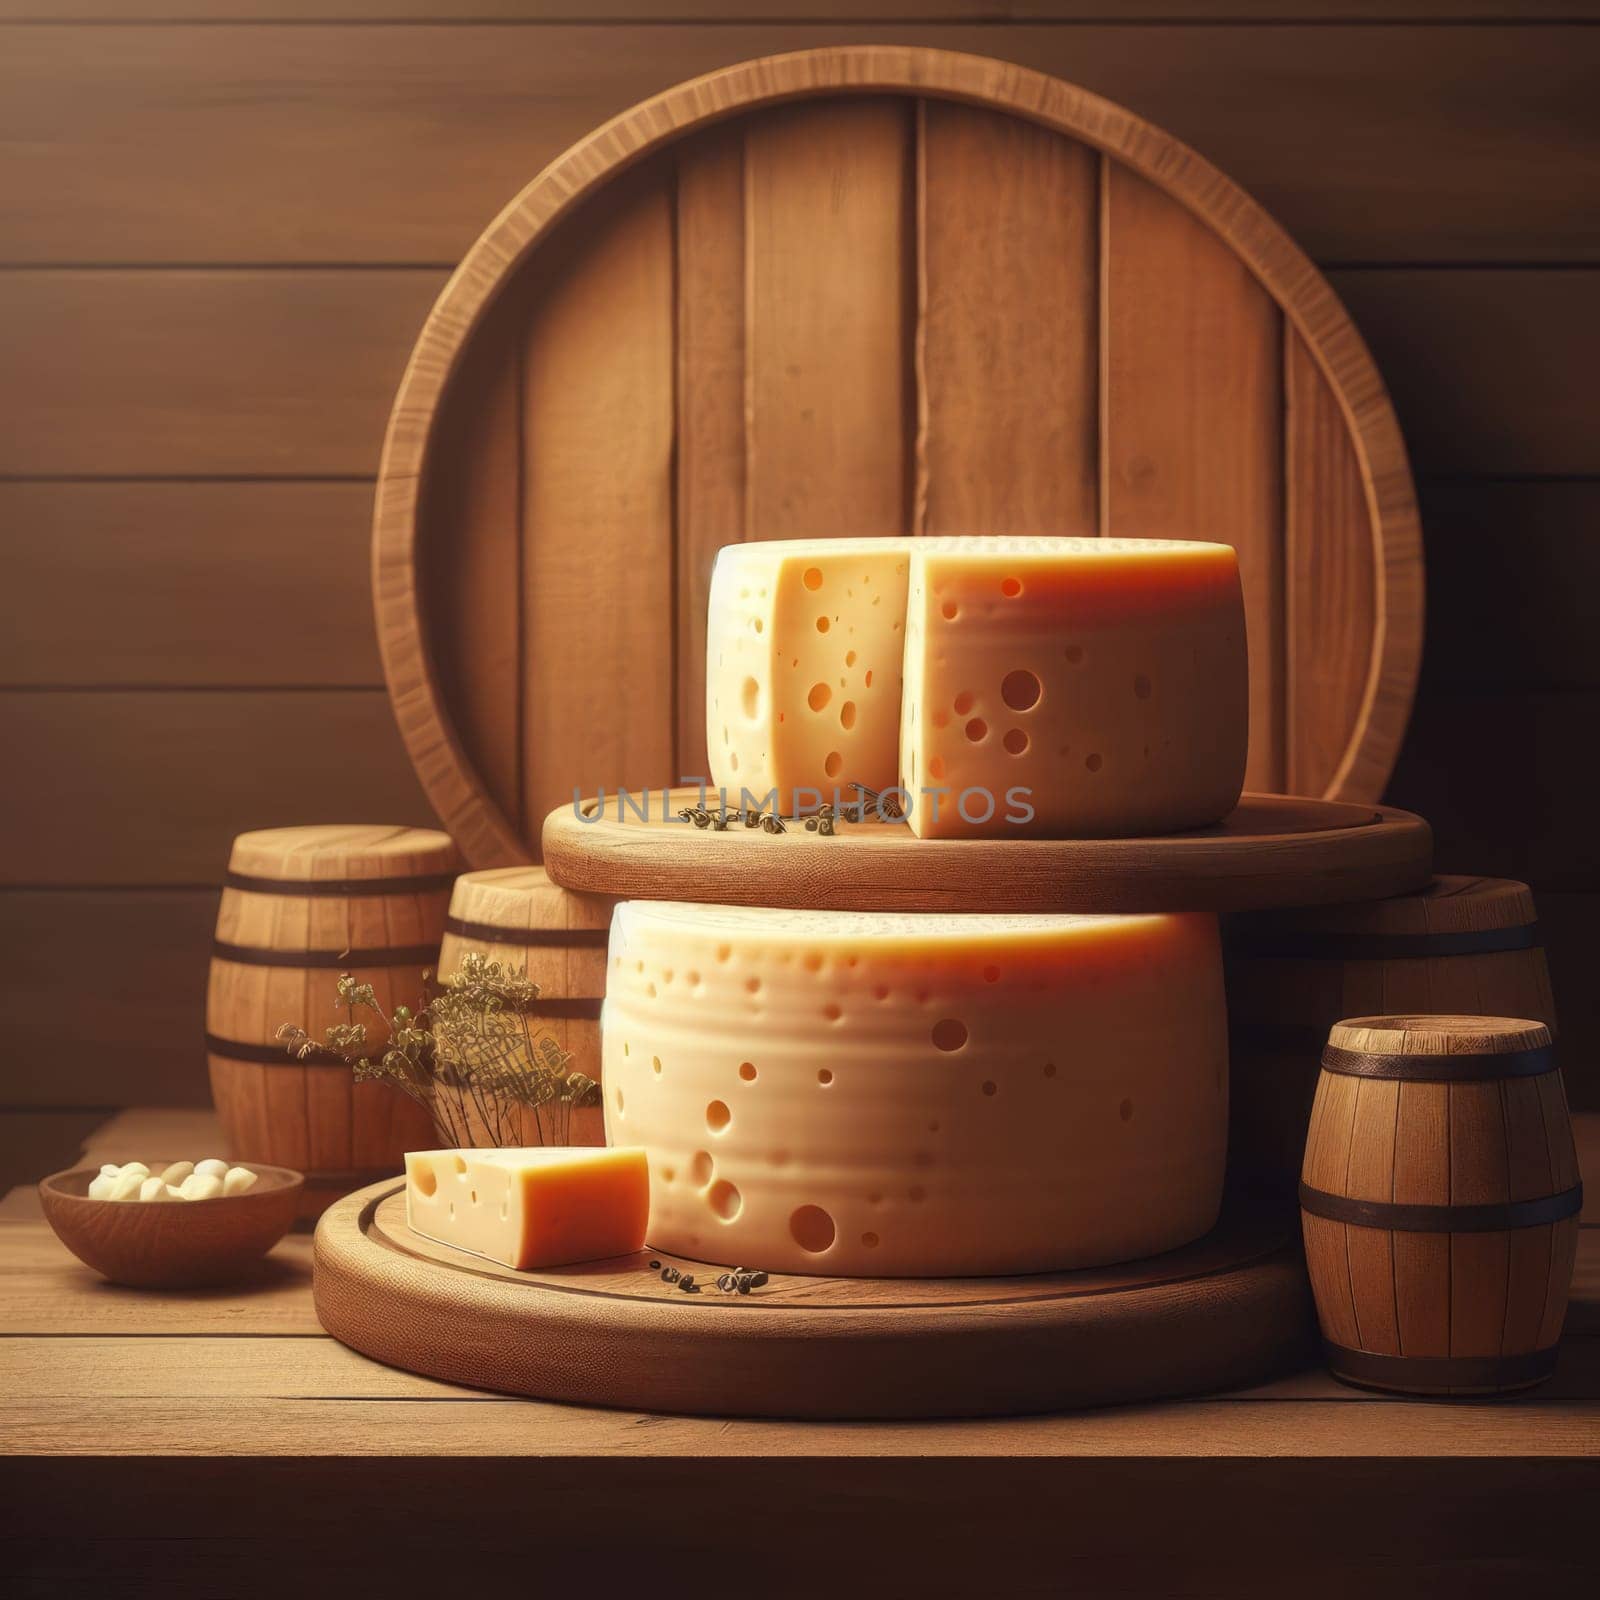 Two large wheels of cheese on a wooden table, with small barrels and a bowl of nuts in the background